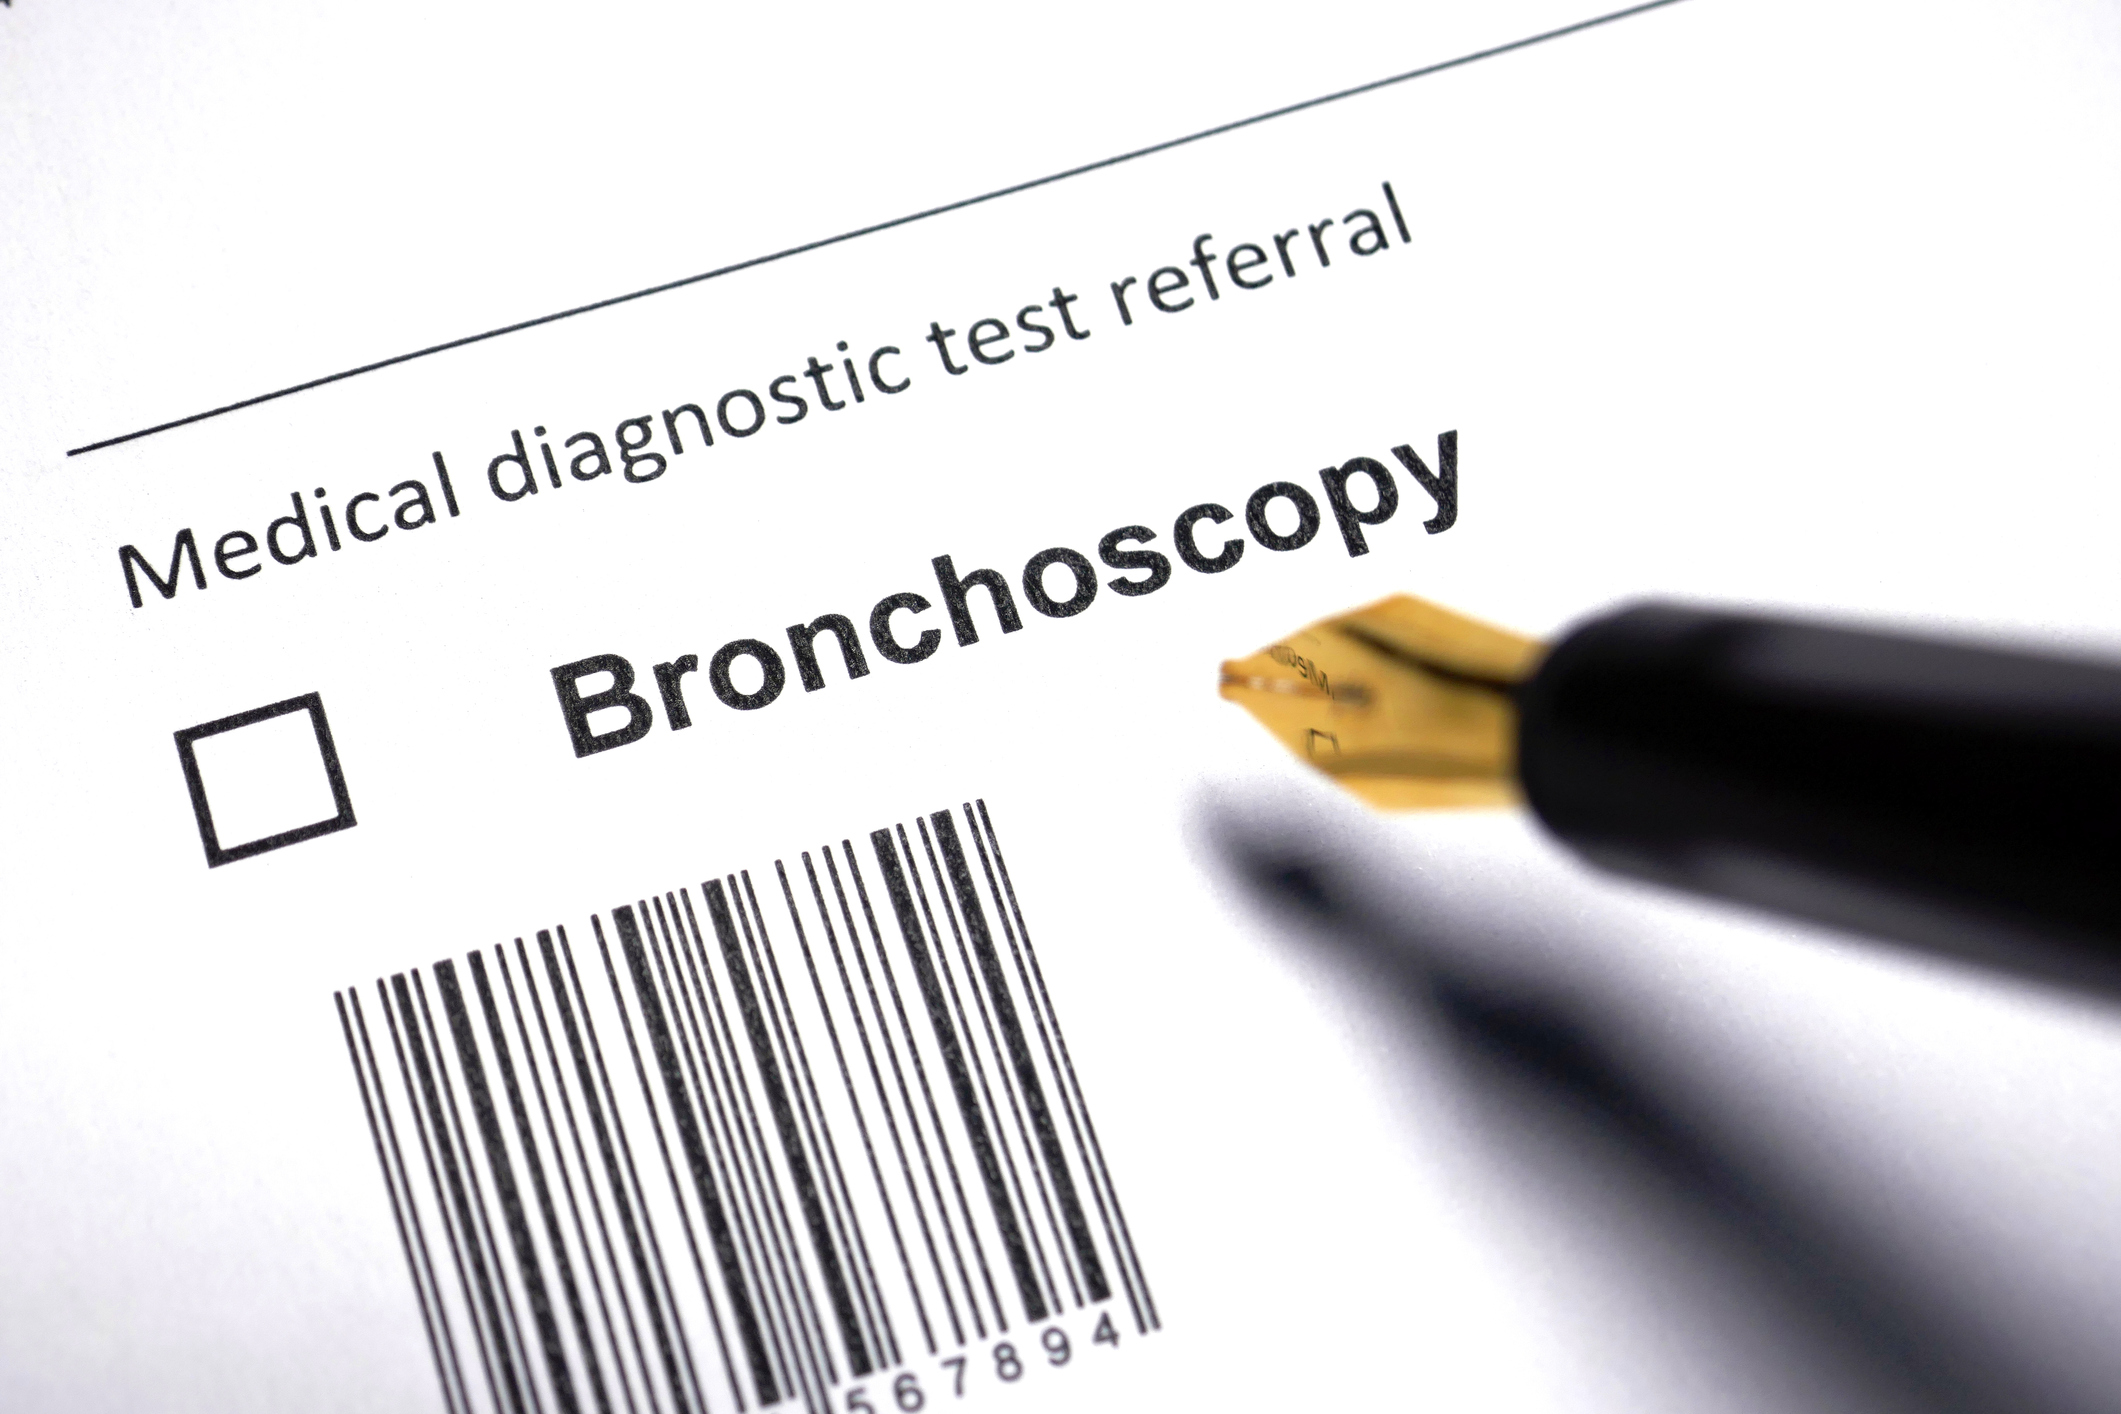 Bronchoscopy has been found to help in the study of comorbidities aggravating asthma control.